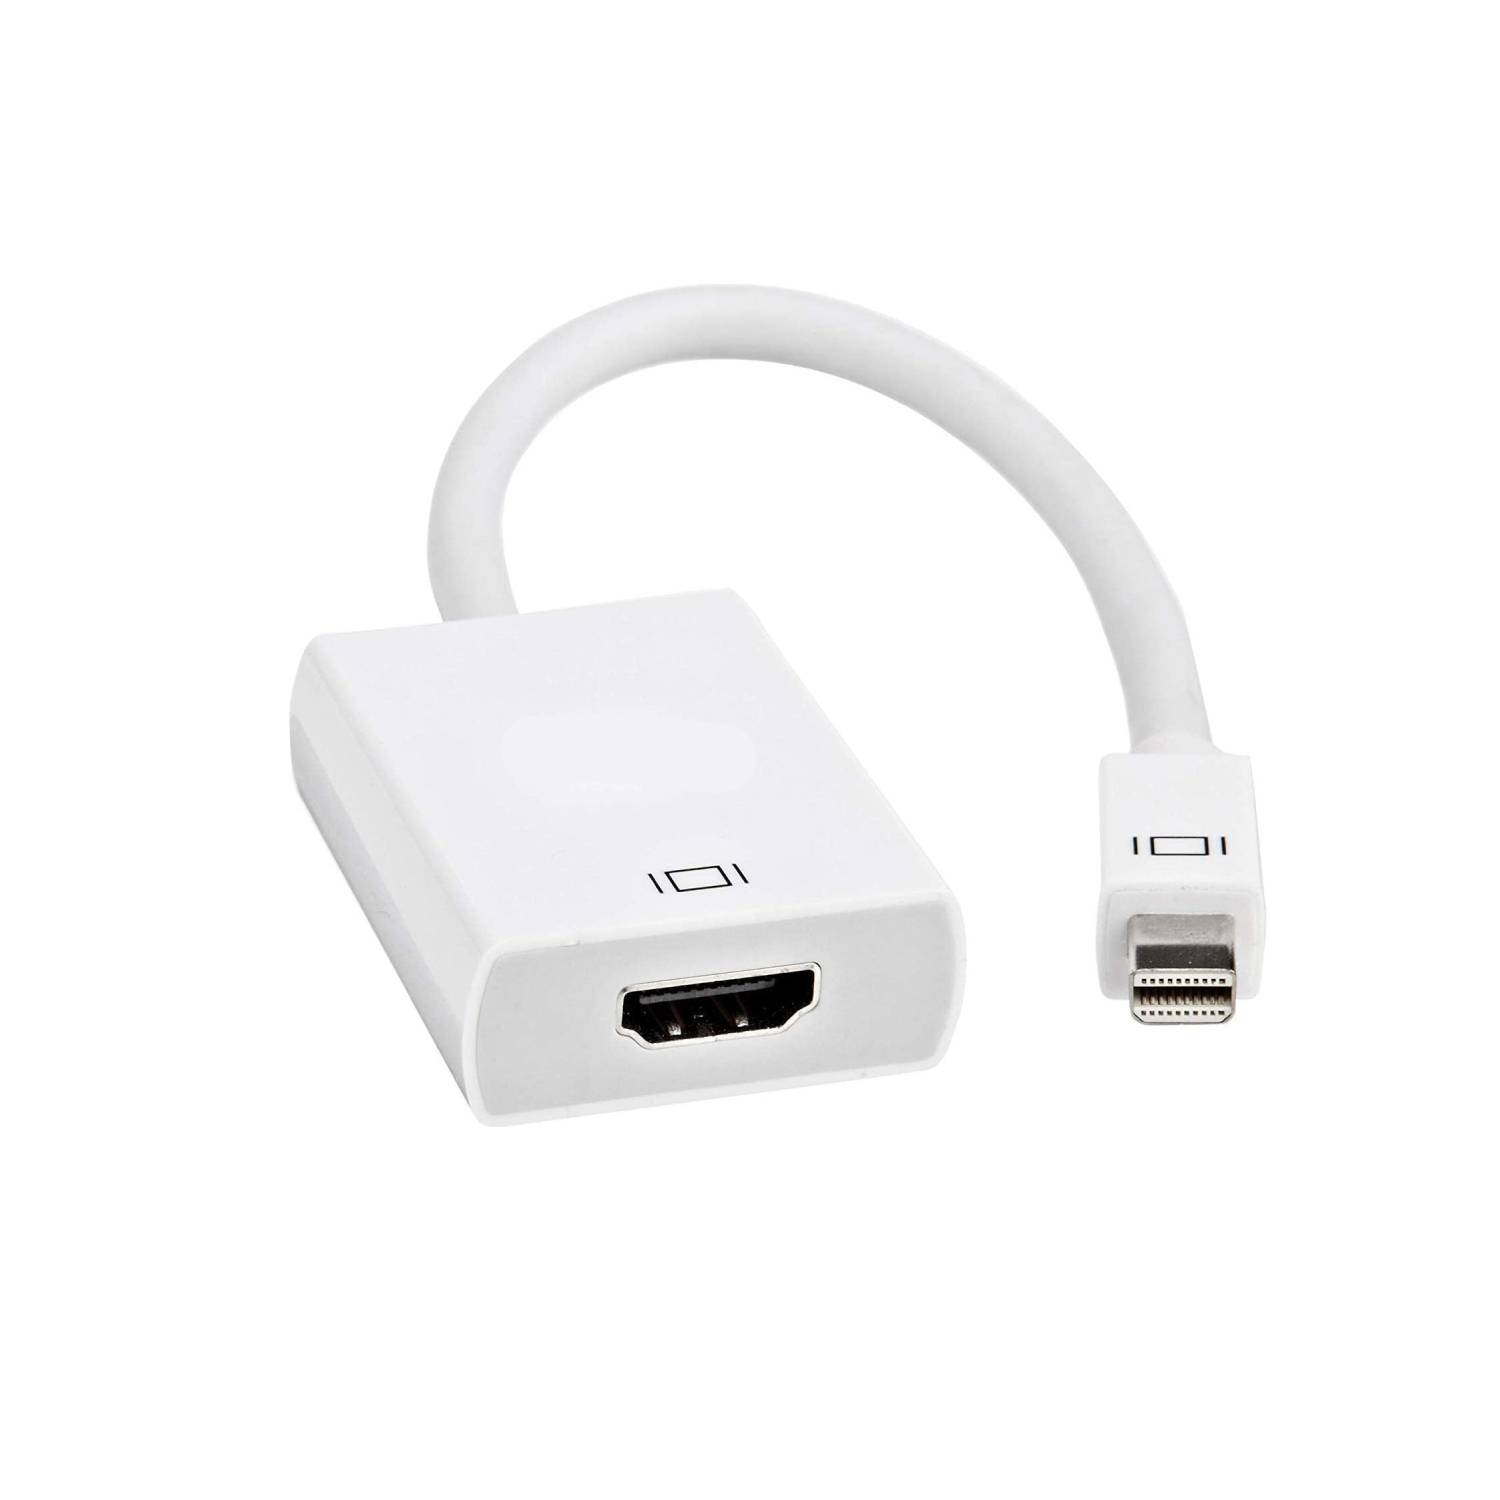 6 inch Mini DisplayPort ThunderBoltTM Male to HDMI Female with Audio Adapter